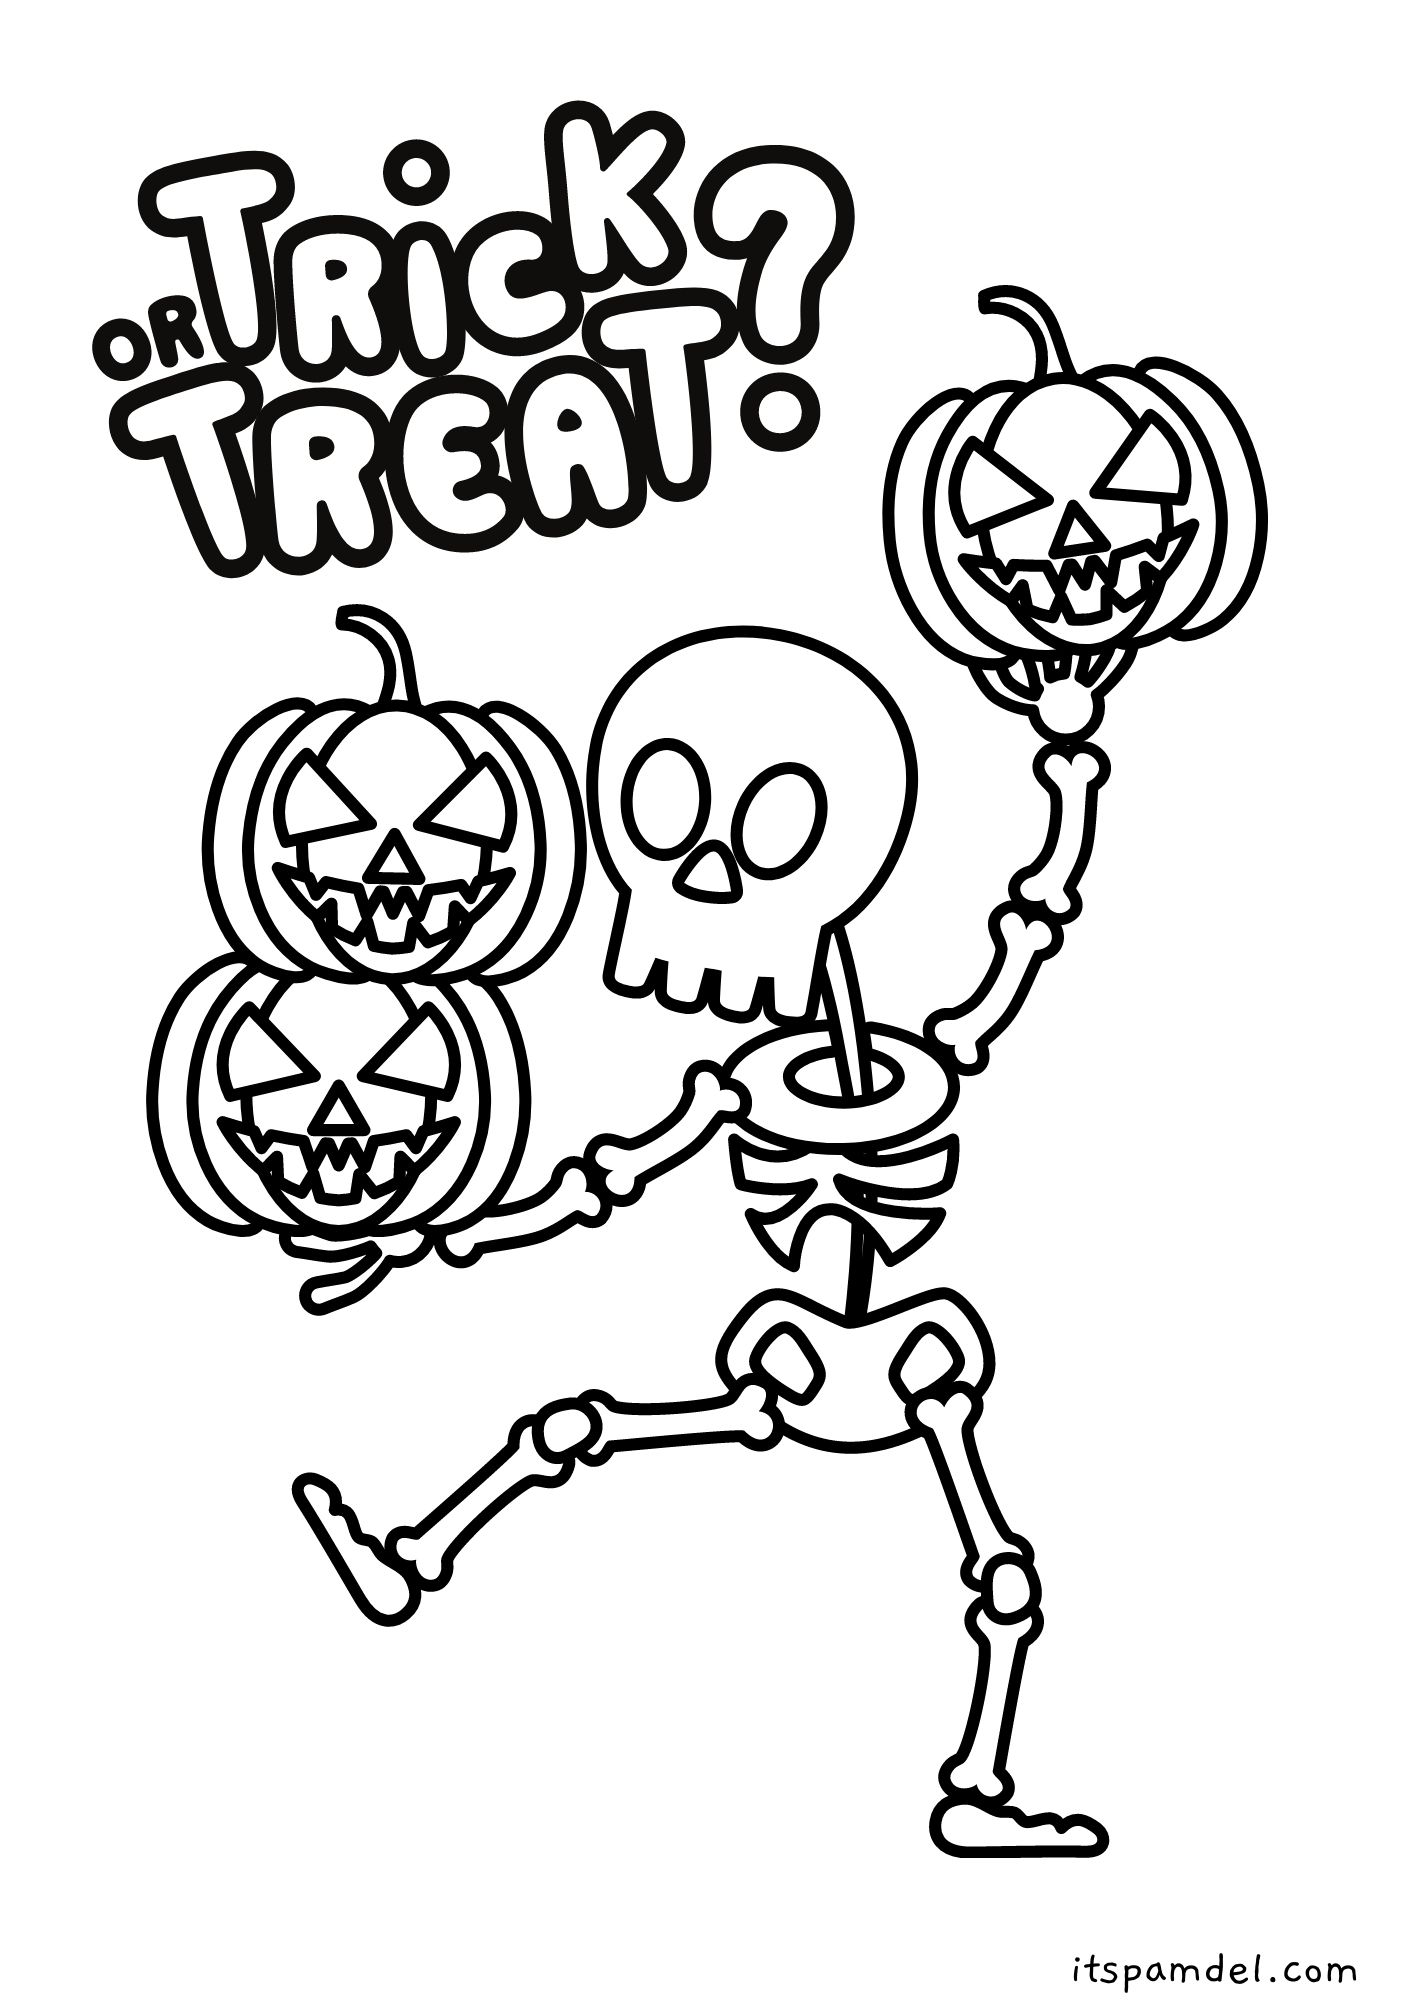 Free Printable Halloween Coloring Pages for Kids   It's Pam Del